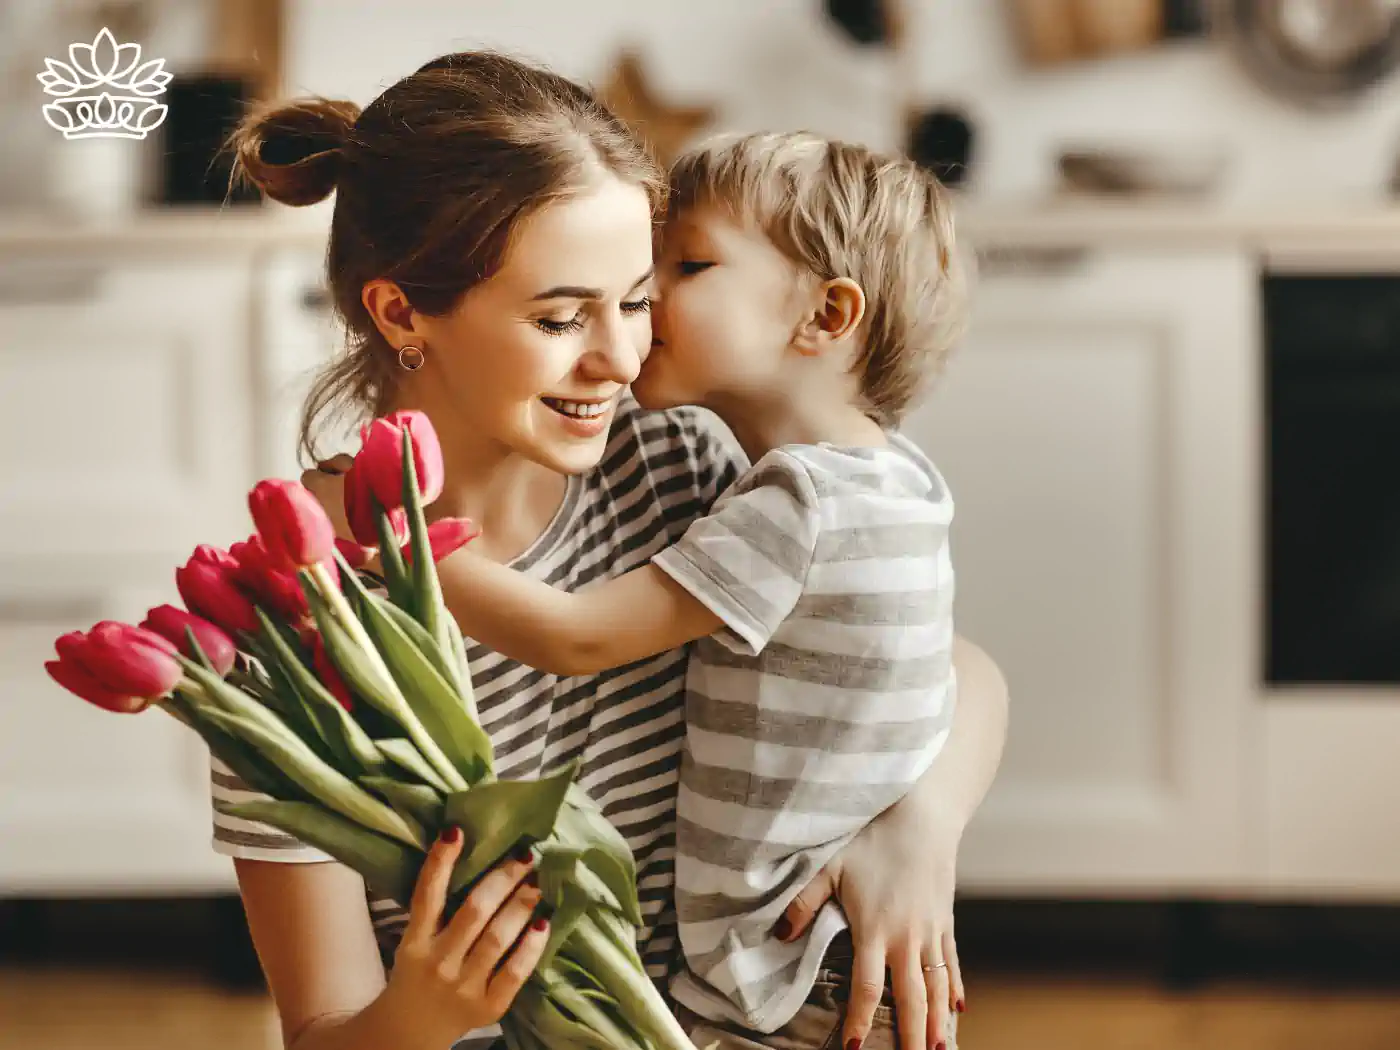 Smiling mother holding her son who kisses her cheek, while she holds a bunch of fresh red tulips in a home setting, showcasing lovingly affordable gifts with flower bouquets under R500 from Fabulous Flowers and Gifts.